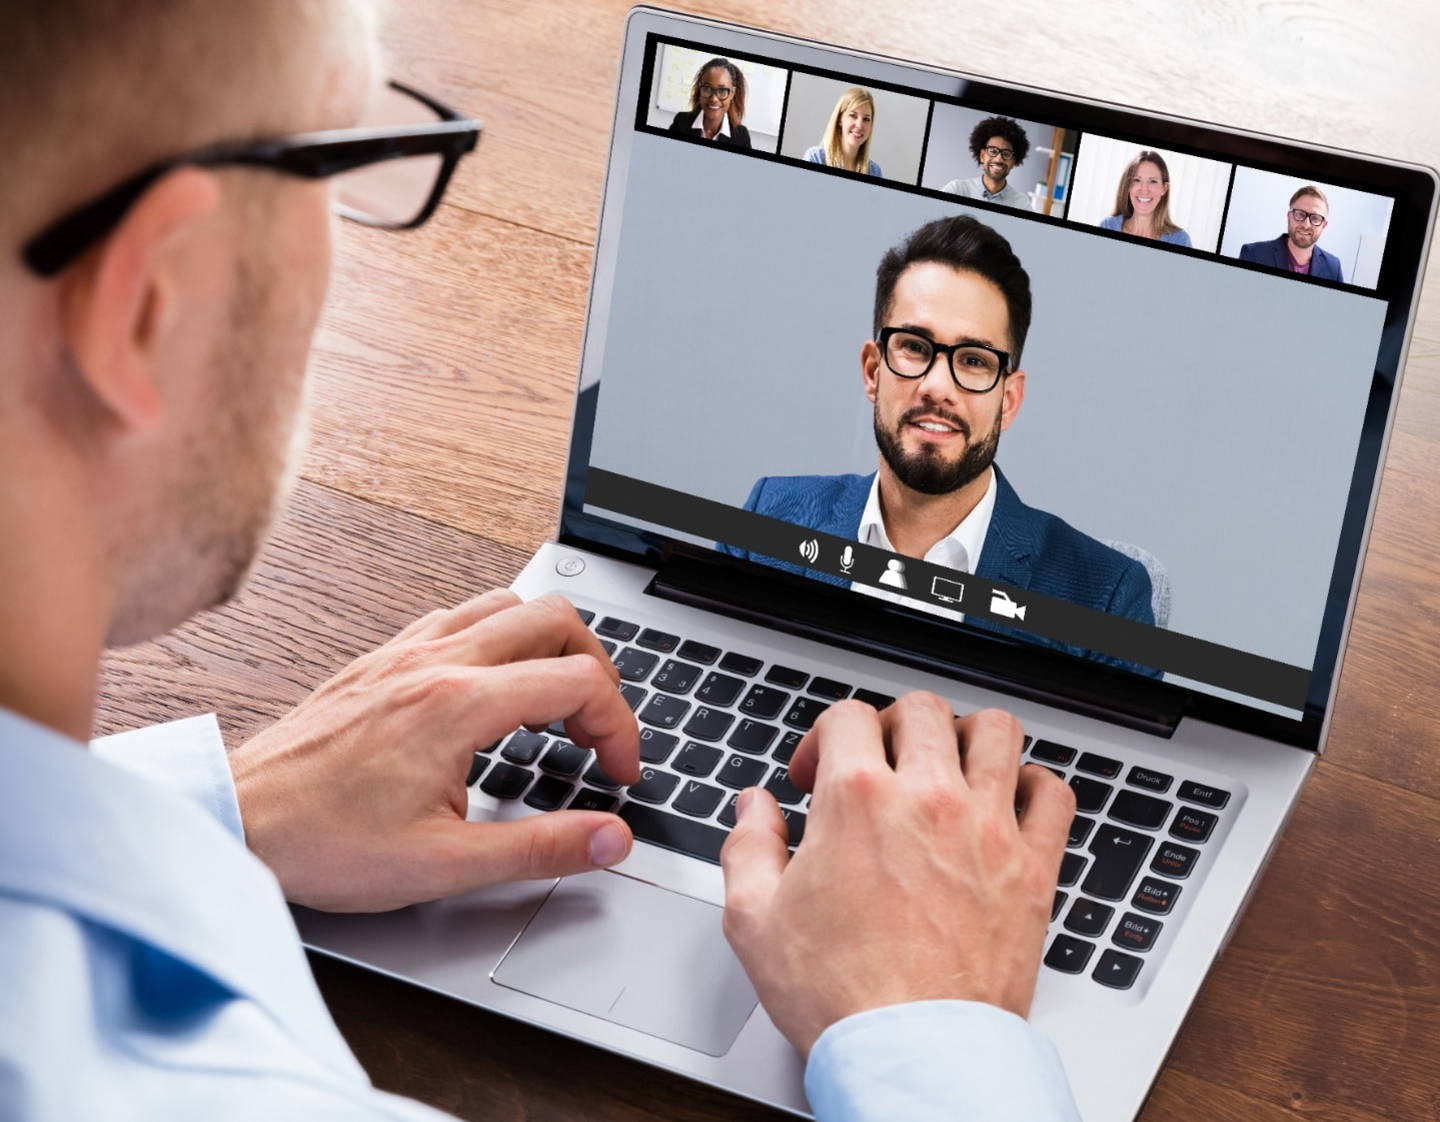 Ace your interview whether it is over video or phone